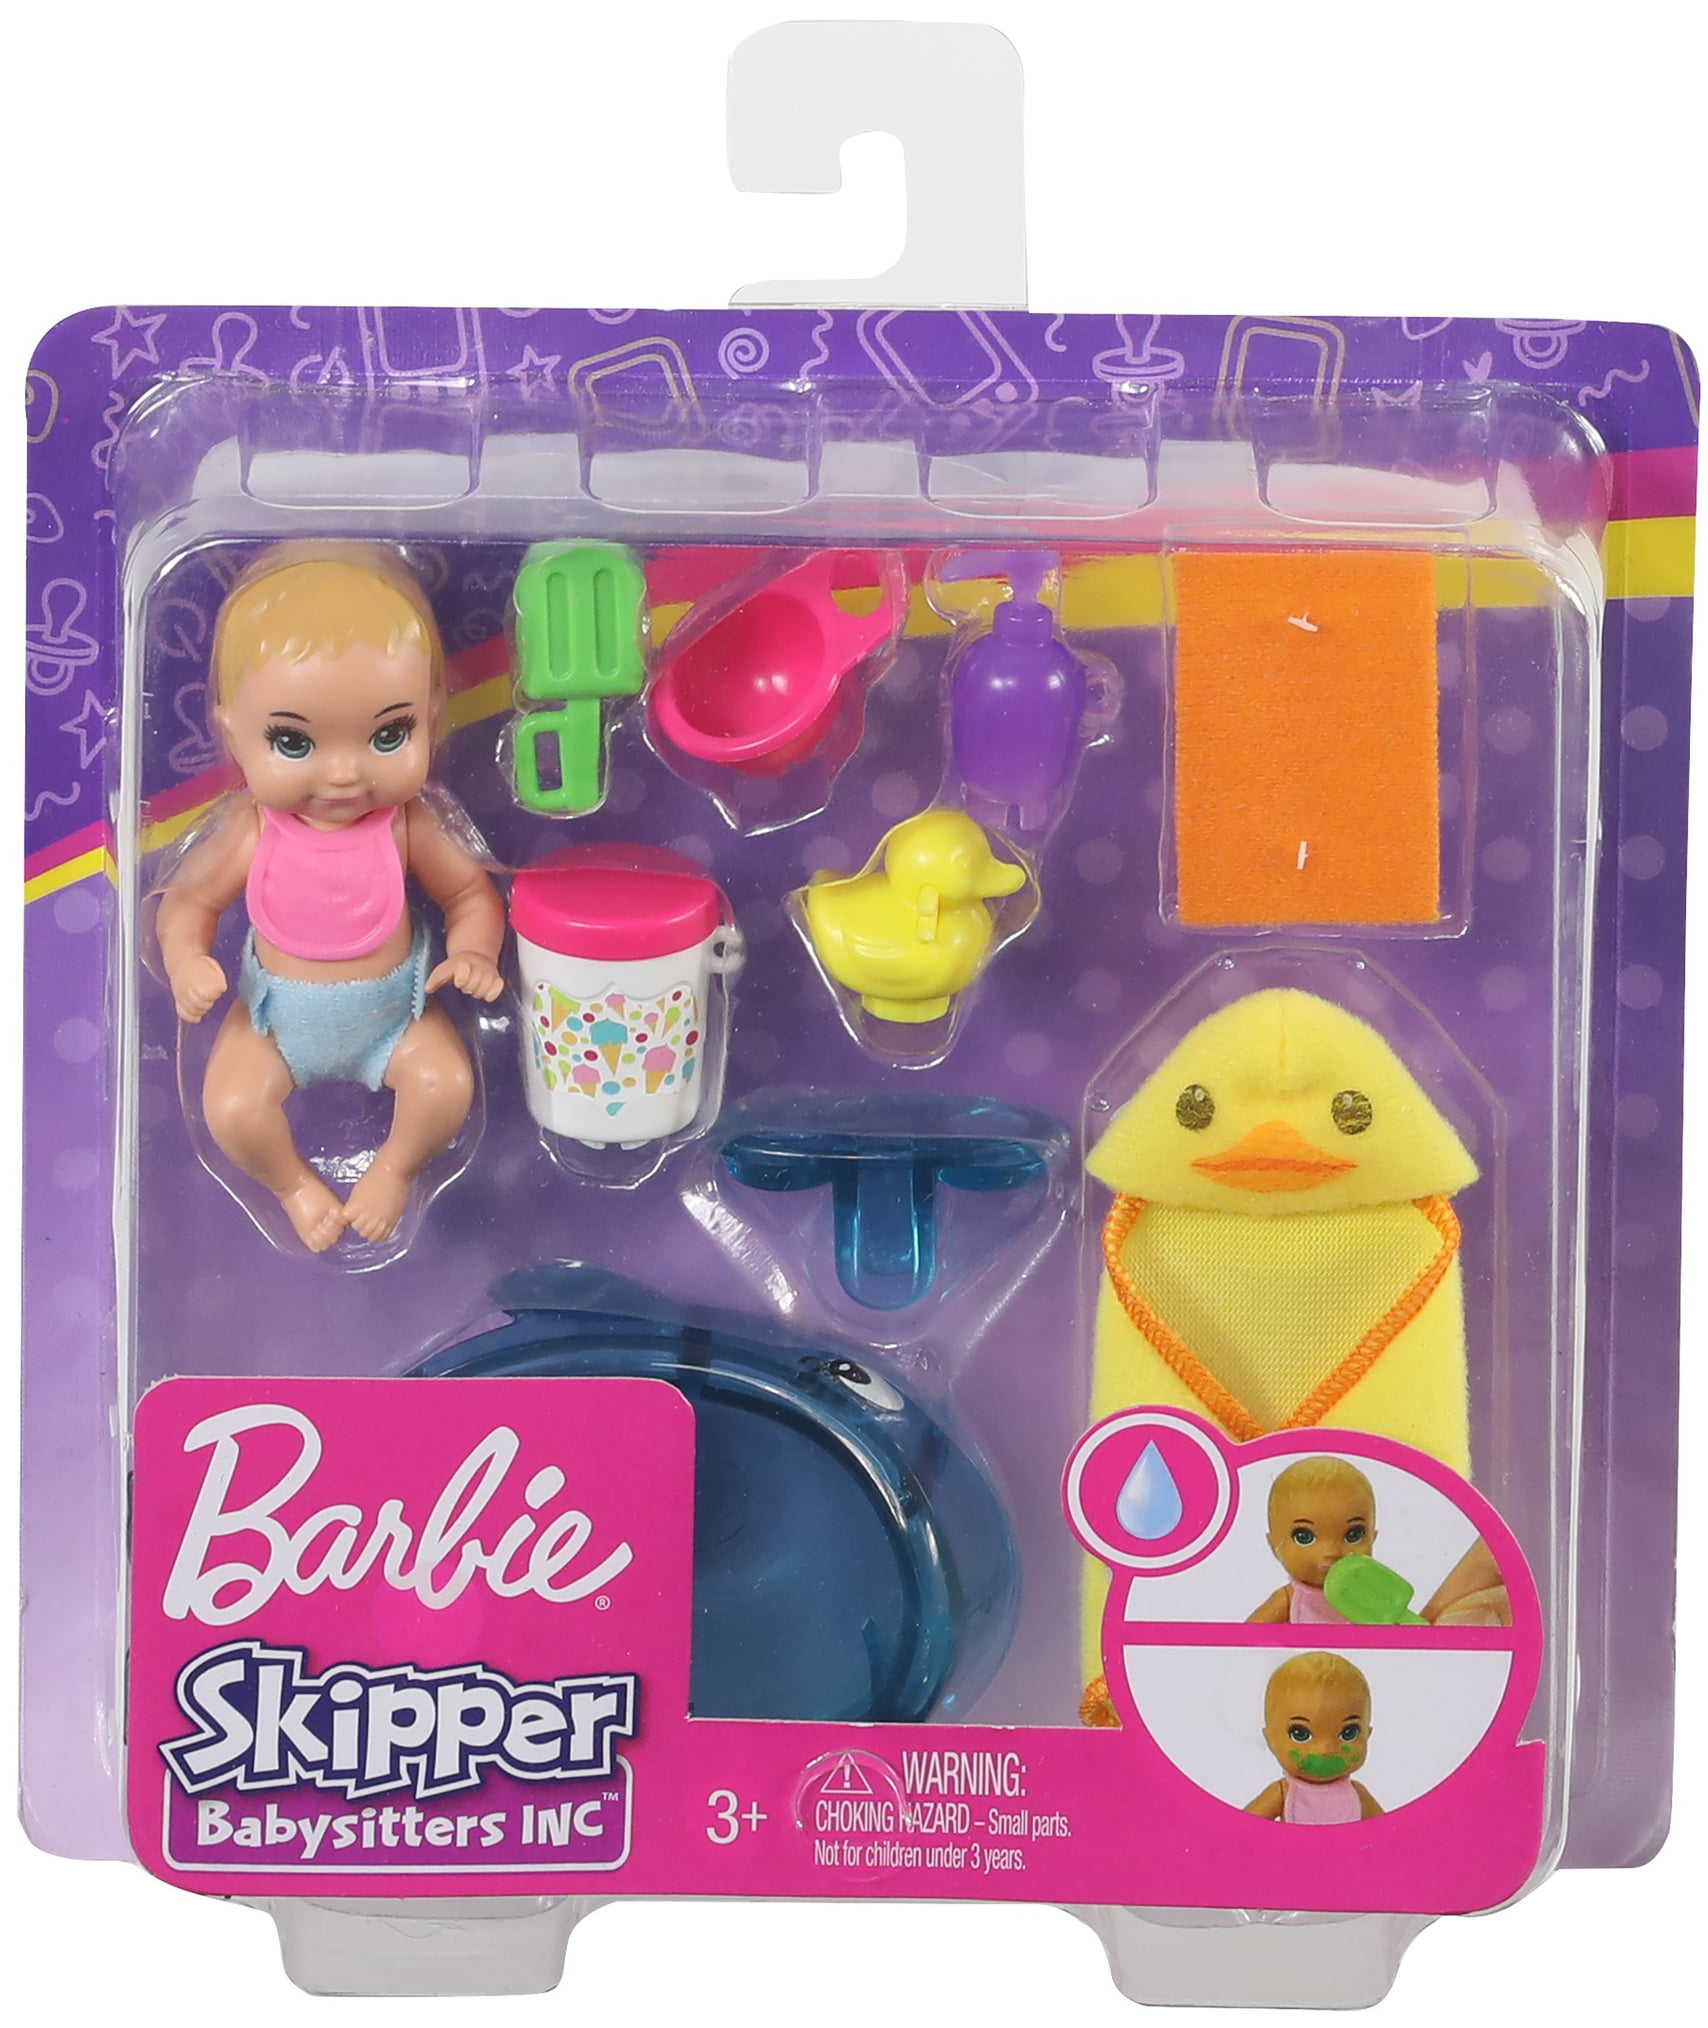 sympathie Middellandse Zee strand Barbie Skipper Babysitters Inc. Feeding and Bath-Time Playset With  Color-Change Baby Doll, Tub and 6 Accessories - Walmart.com